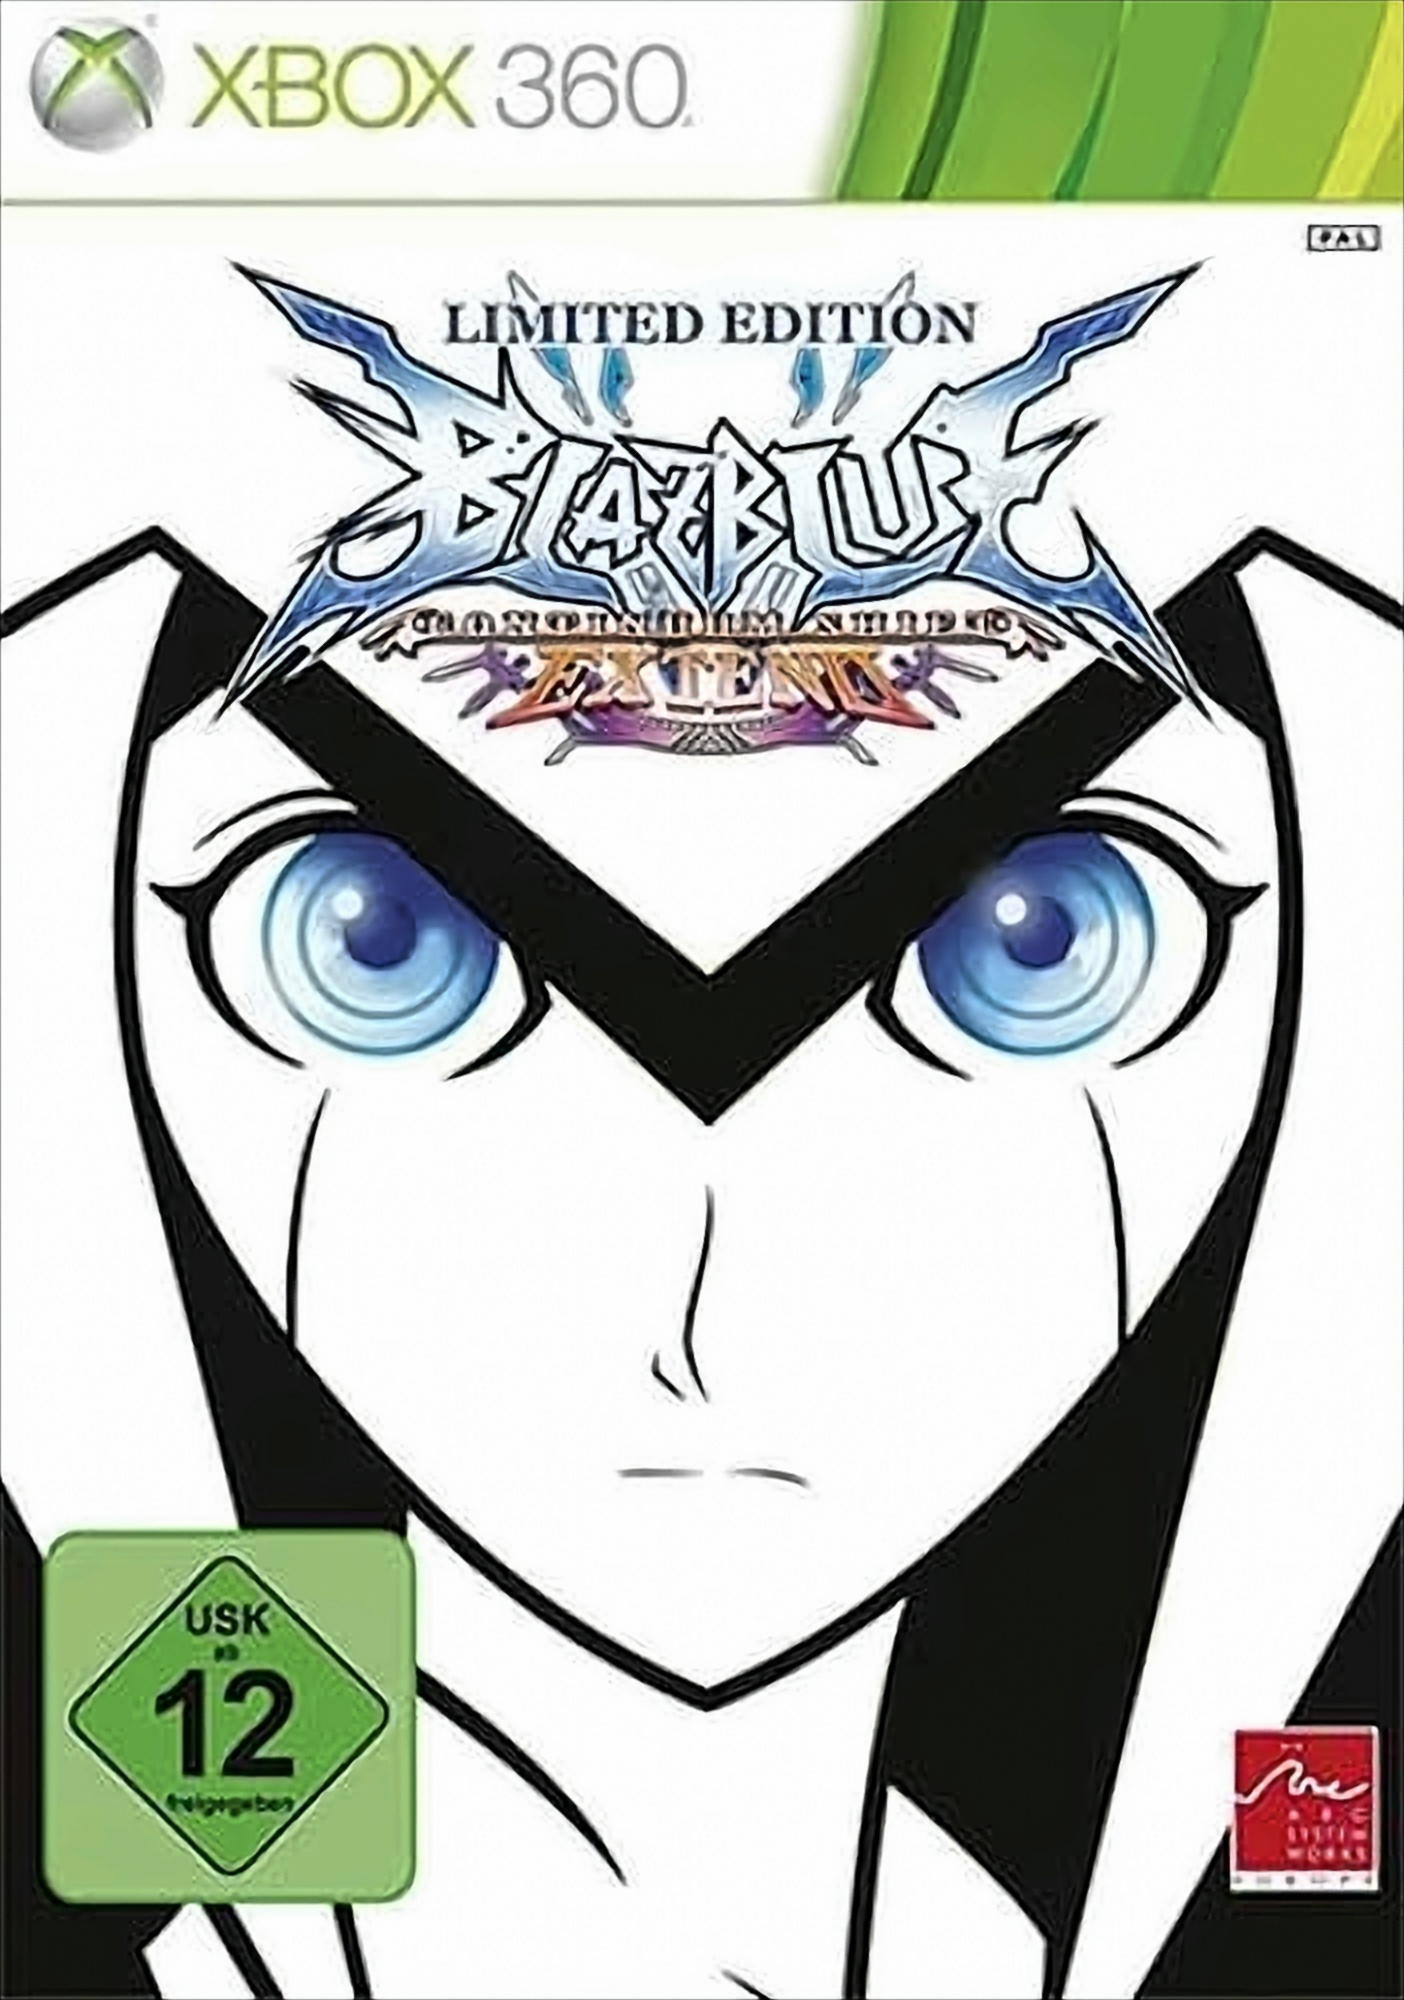 360] Edition [Xbox - BlazBlue: Continuum Limited Extend Shift -